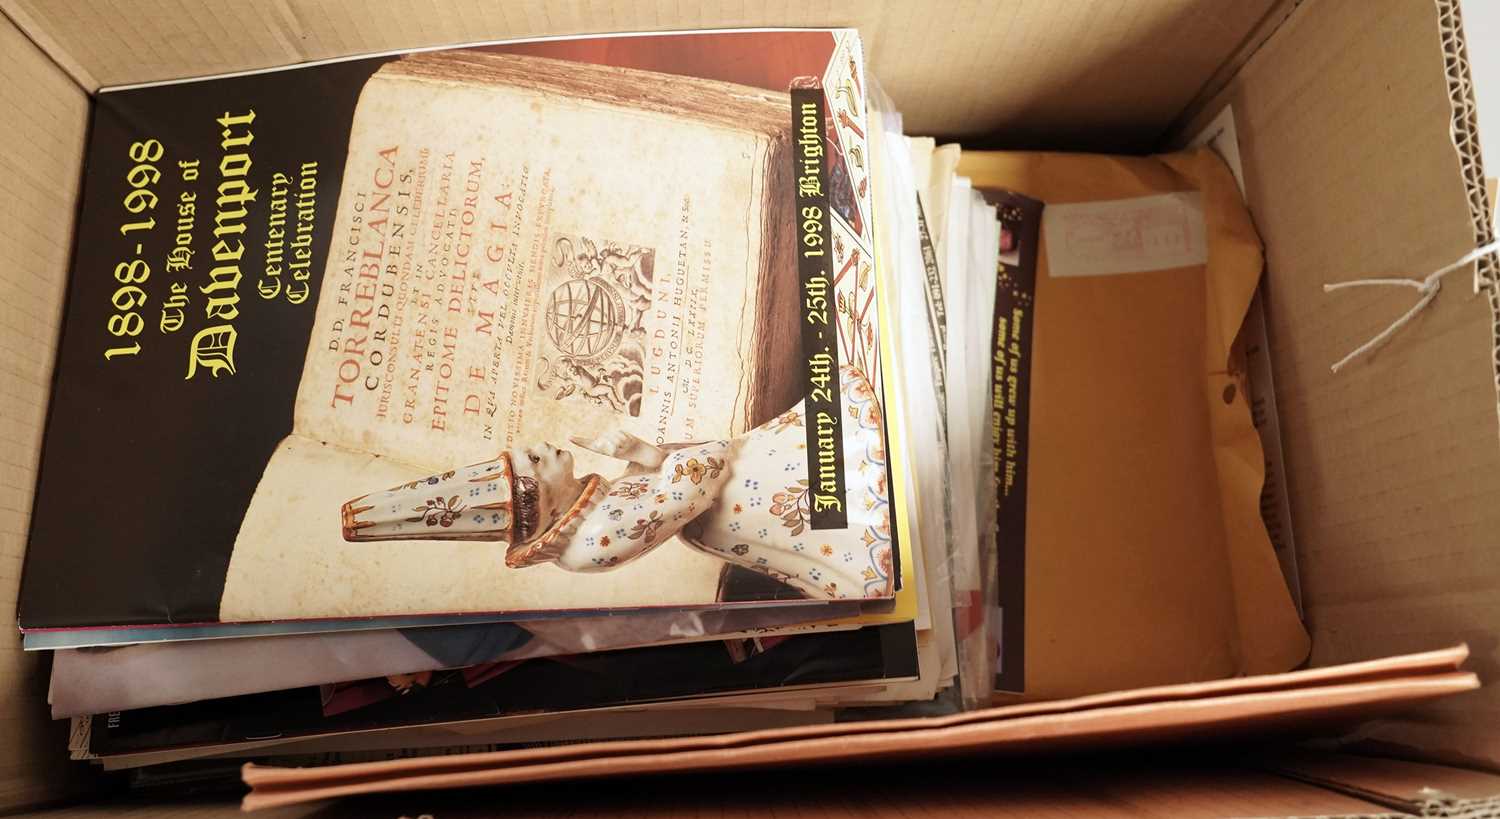 A selection of books and ephemera relating to magic